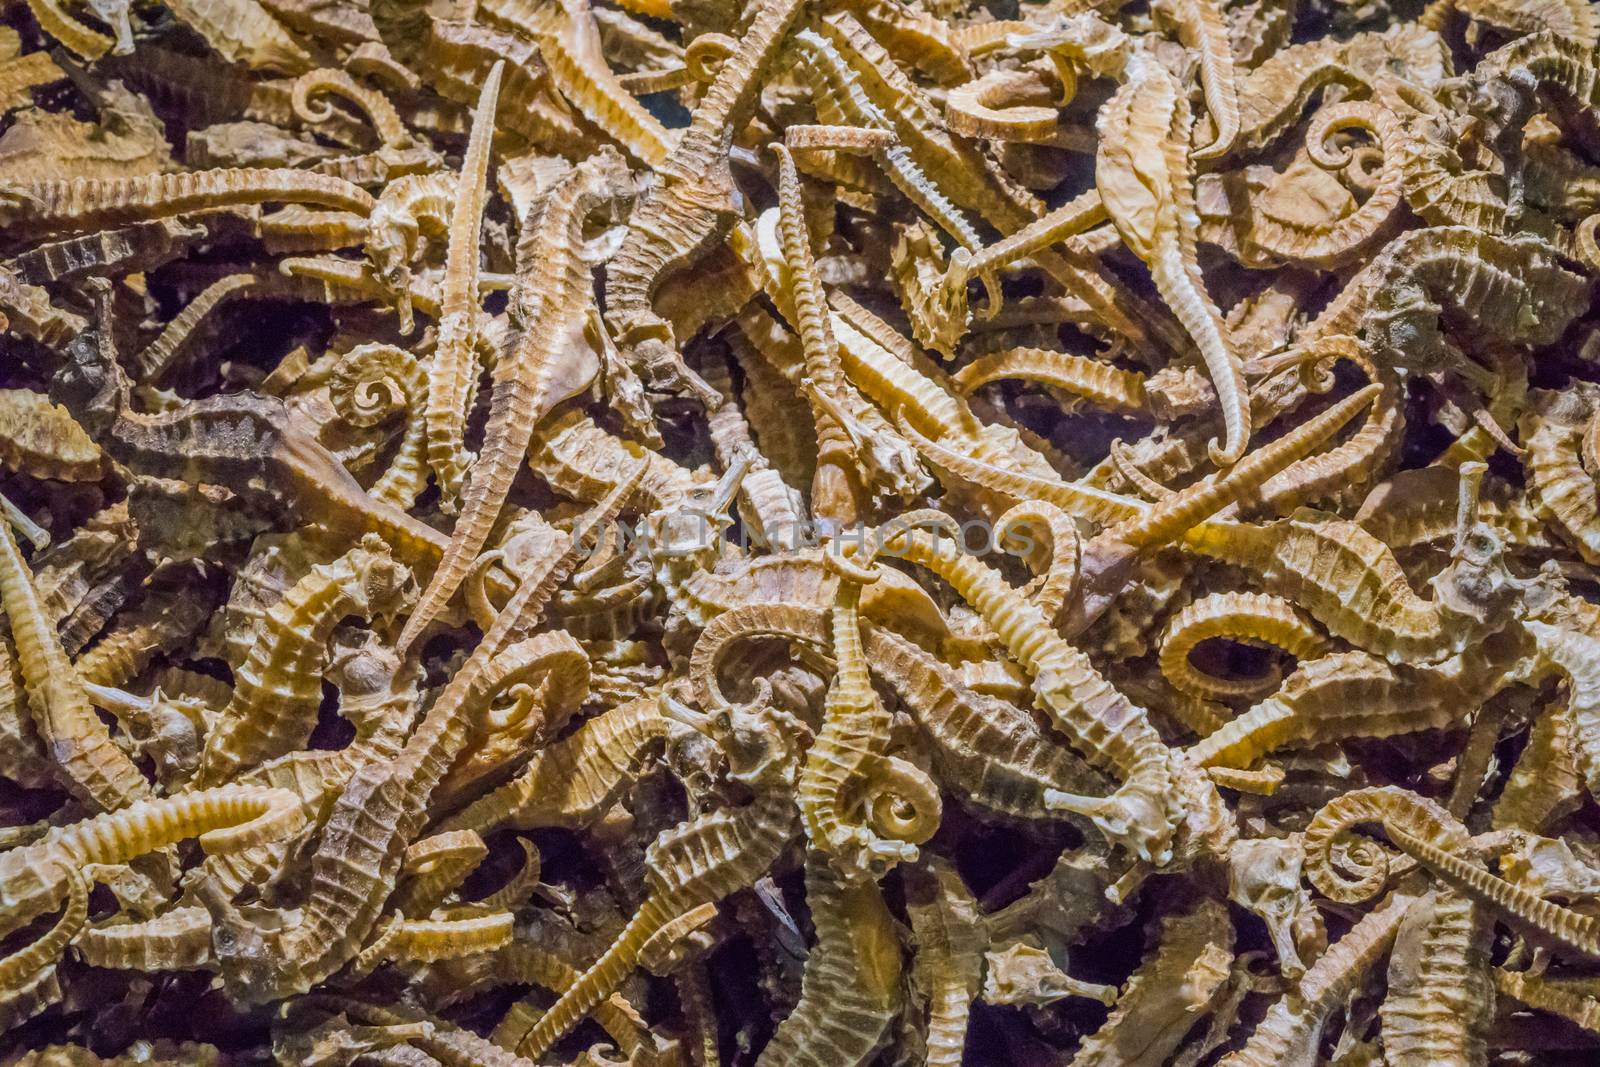 illegal merchandise pile of many dried seahorses souvenirs or chinese alternative medicine